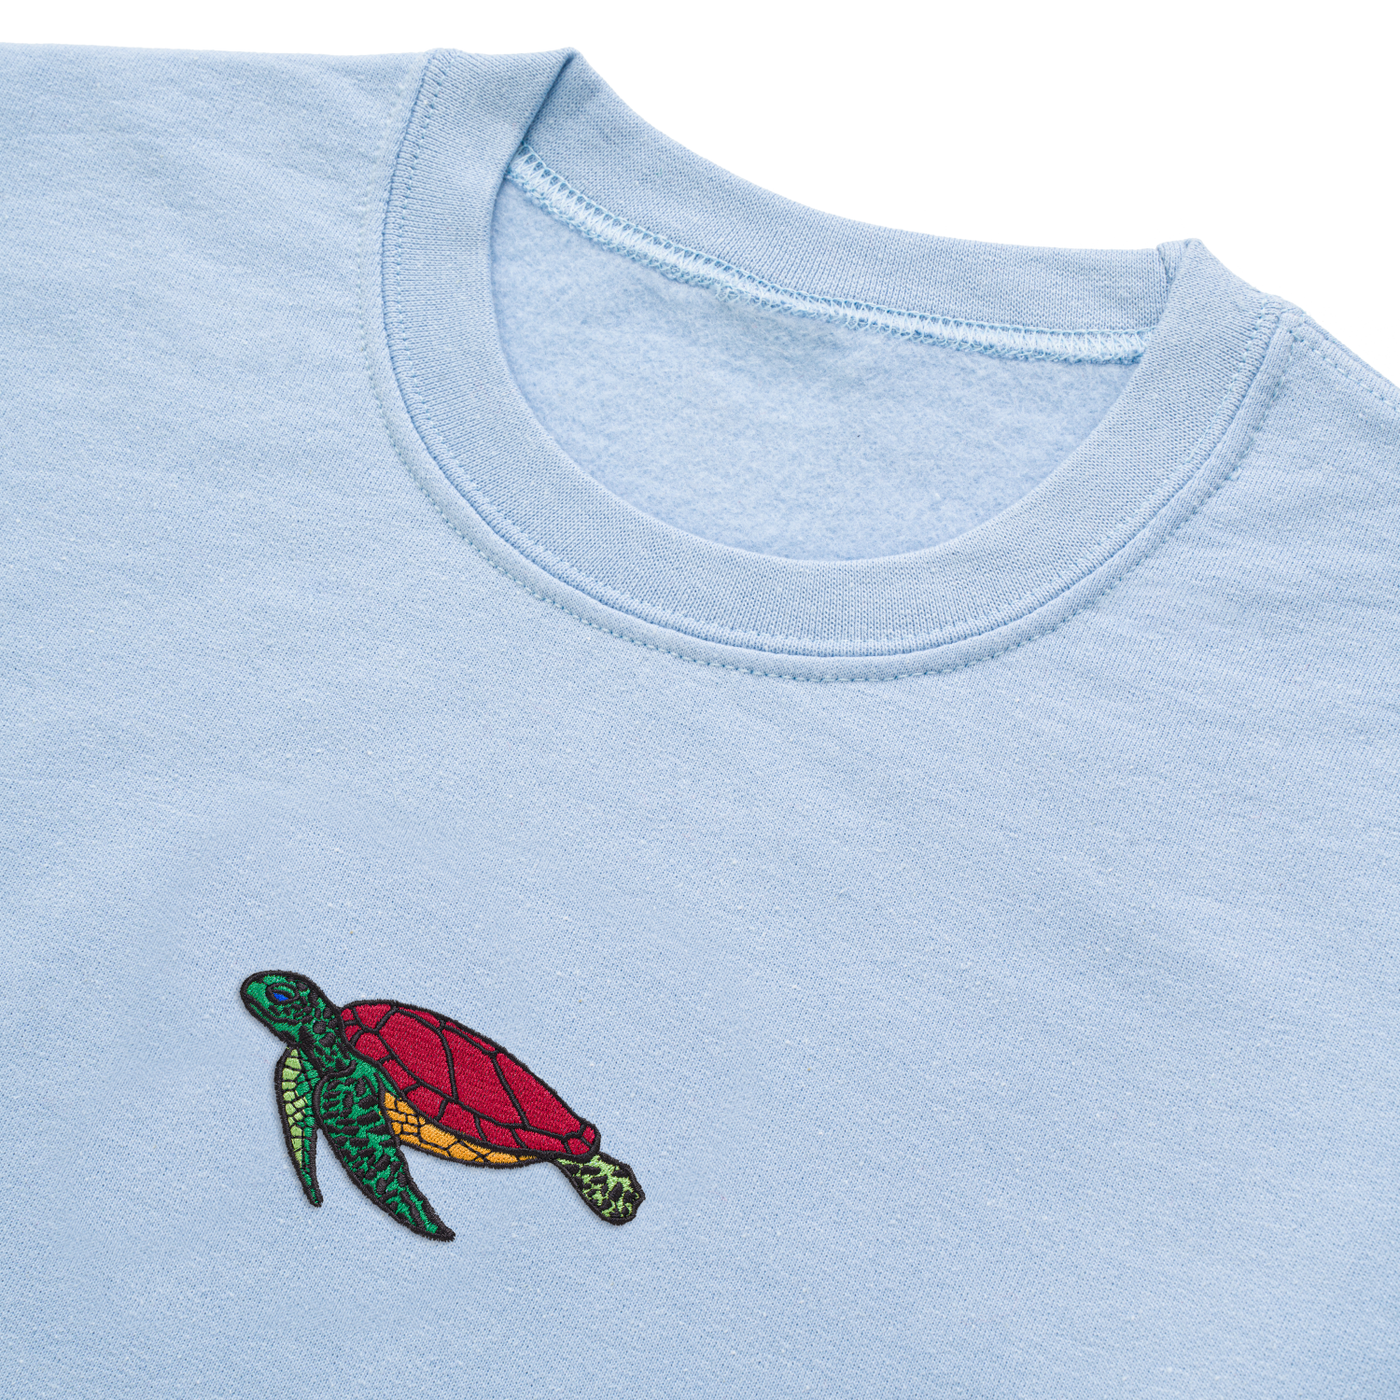 Bobby's Planet Women's Embroidered Sea Turtle Sweatshirt from Seven Seas Fish Animals Collection in Light Blue Color#color_light-blue